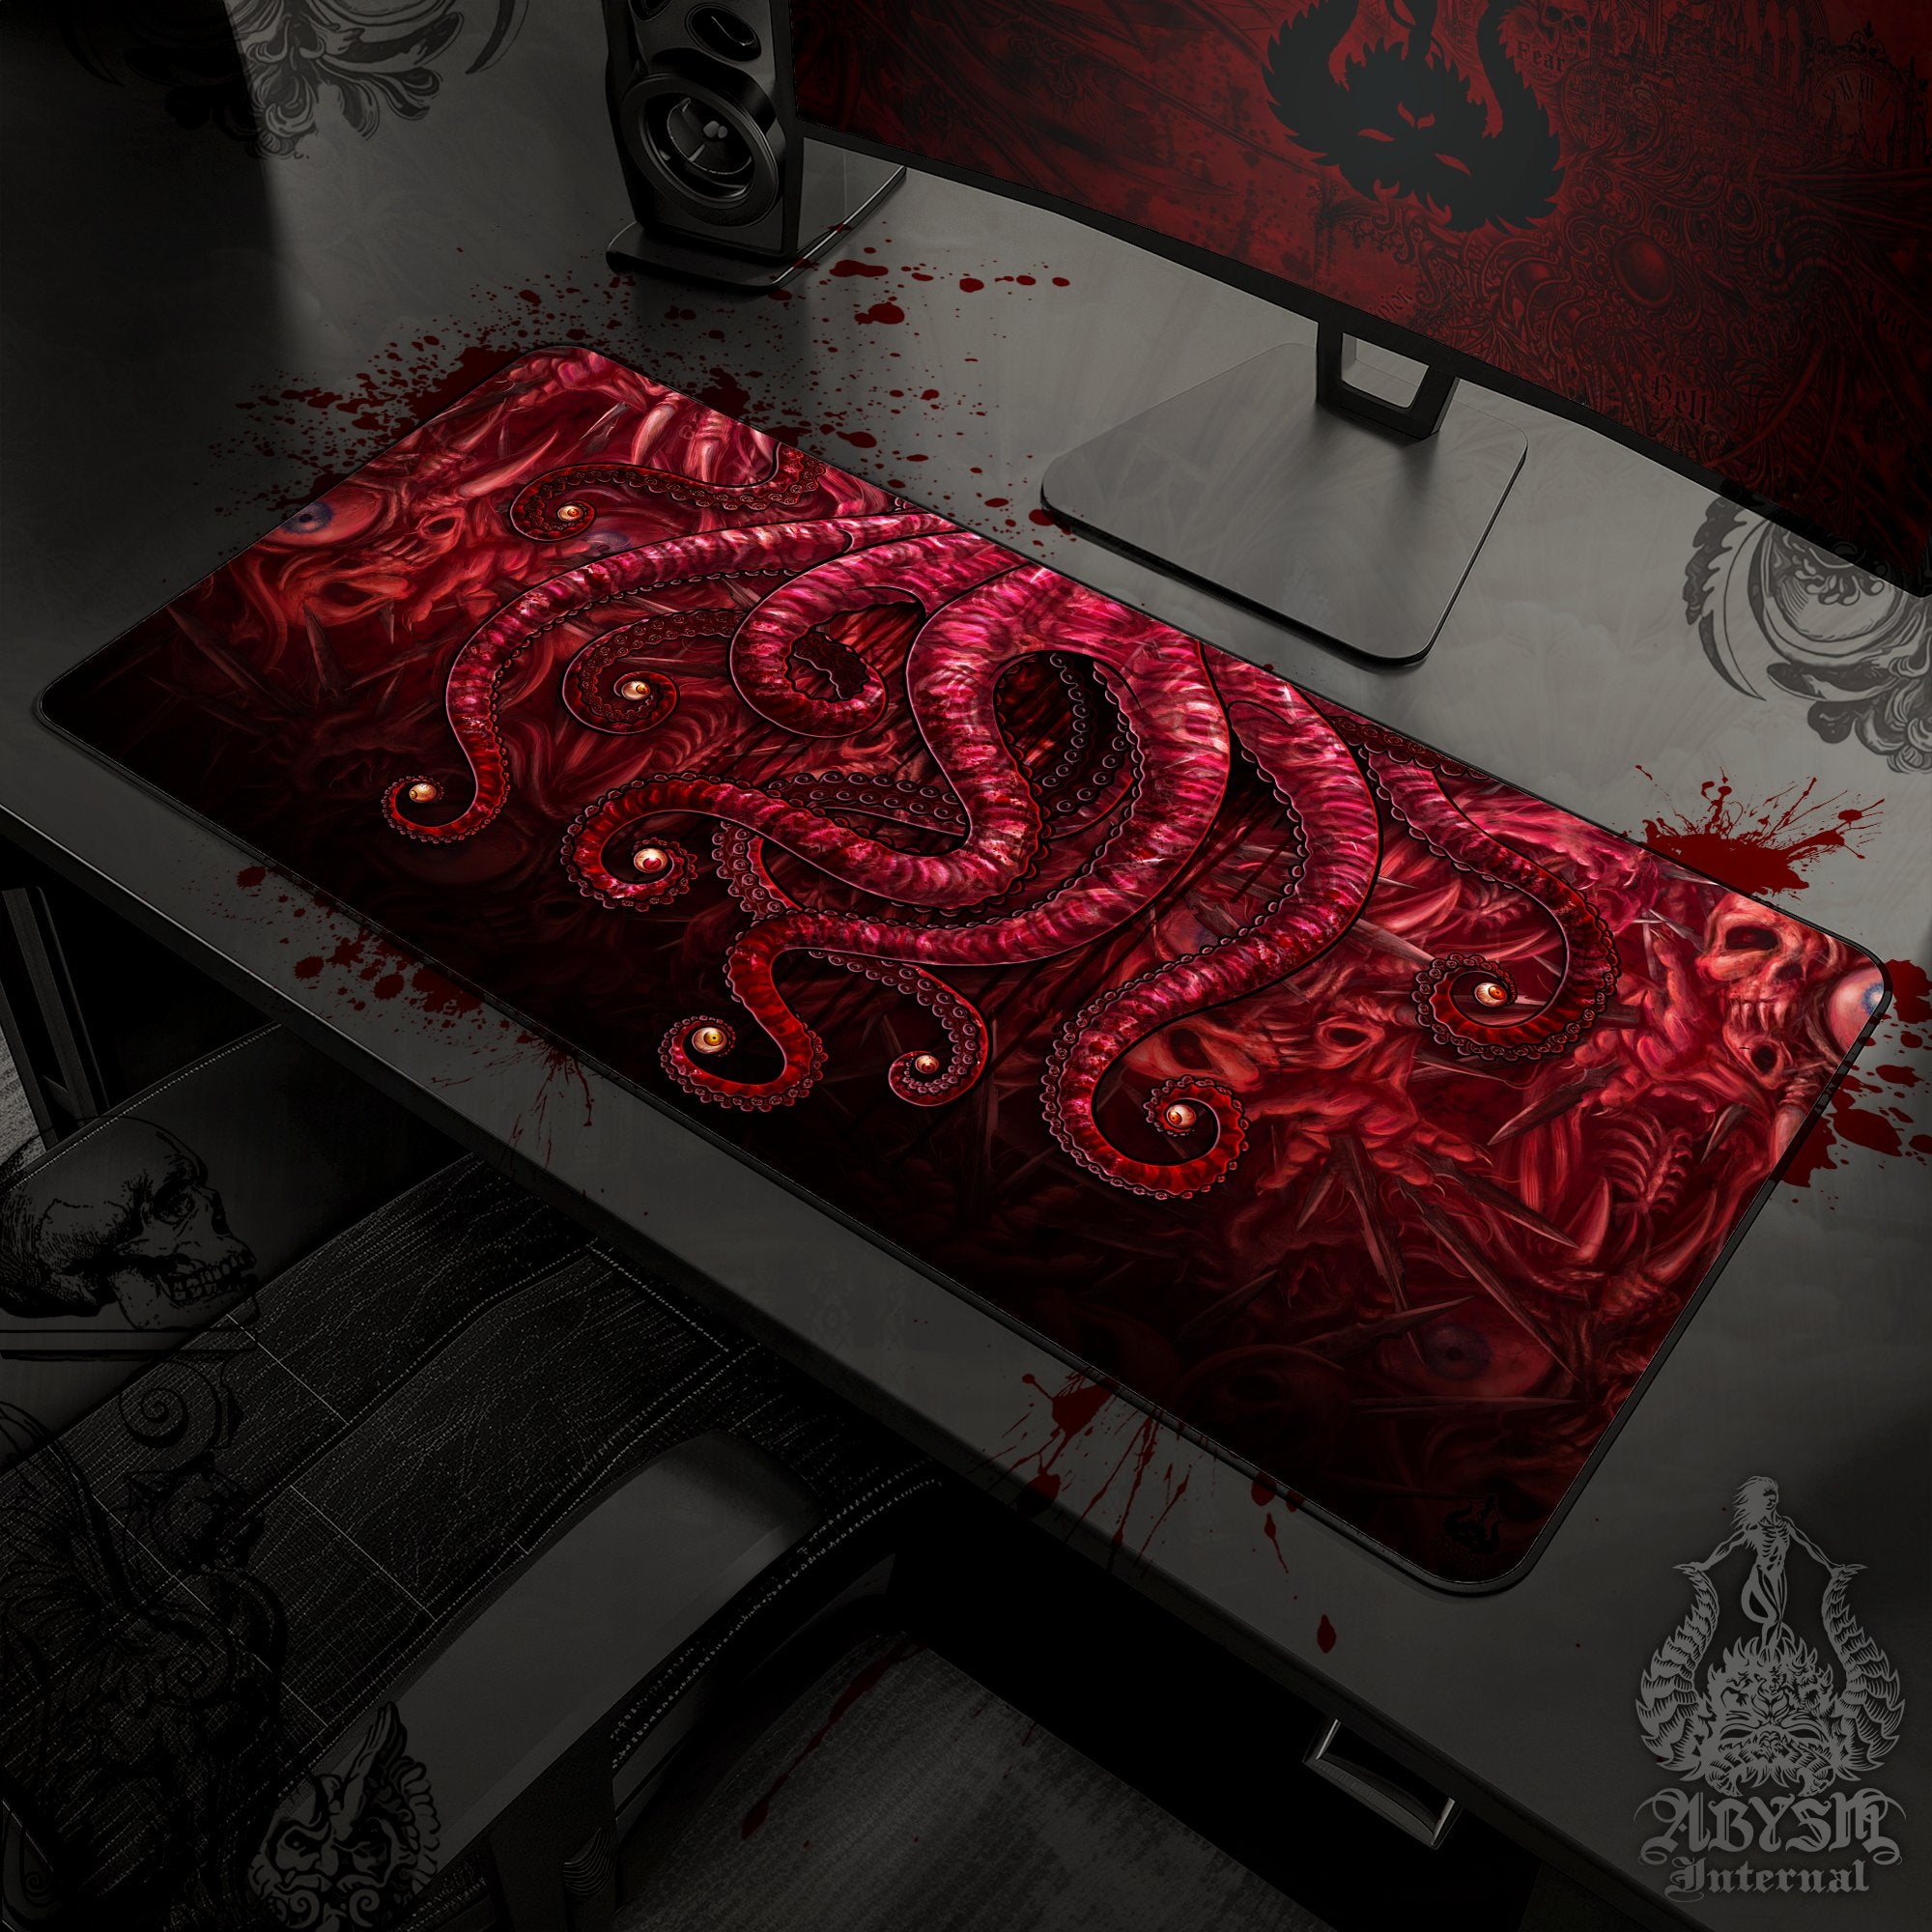 Horror Desk Mat, Monster Eyeballs Gaming Mouse Pad, Halloween Tentacles Table Protector Cover, Octopus Workpad, Art Print - Gore Blood - Abysm Internal